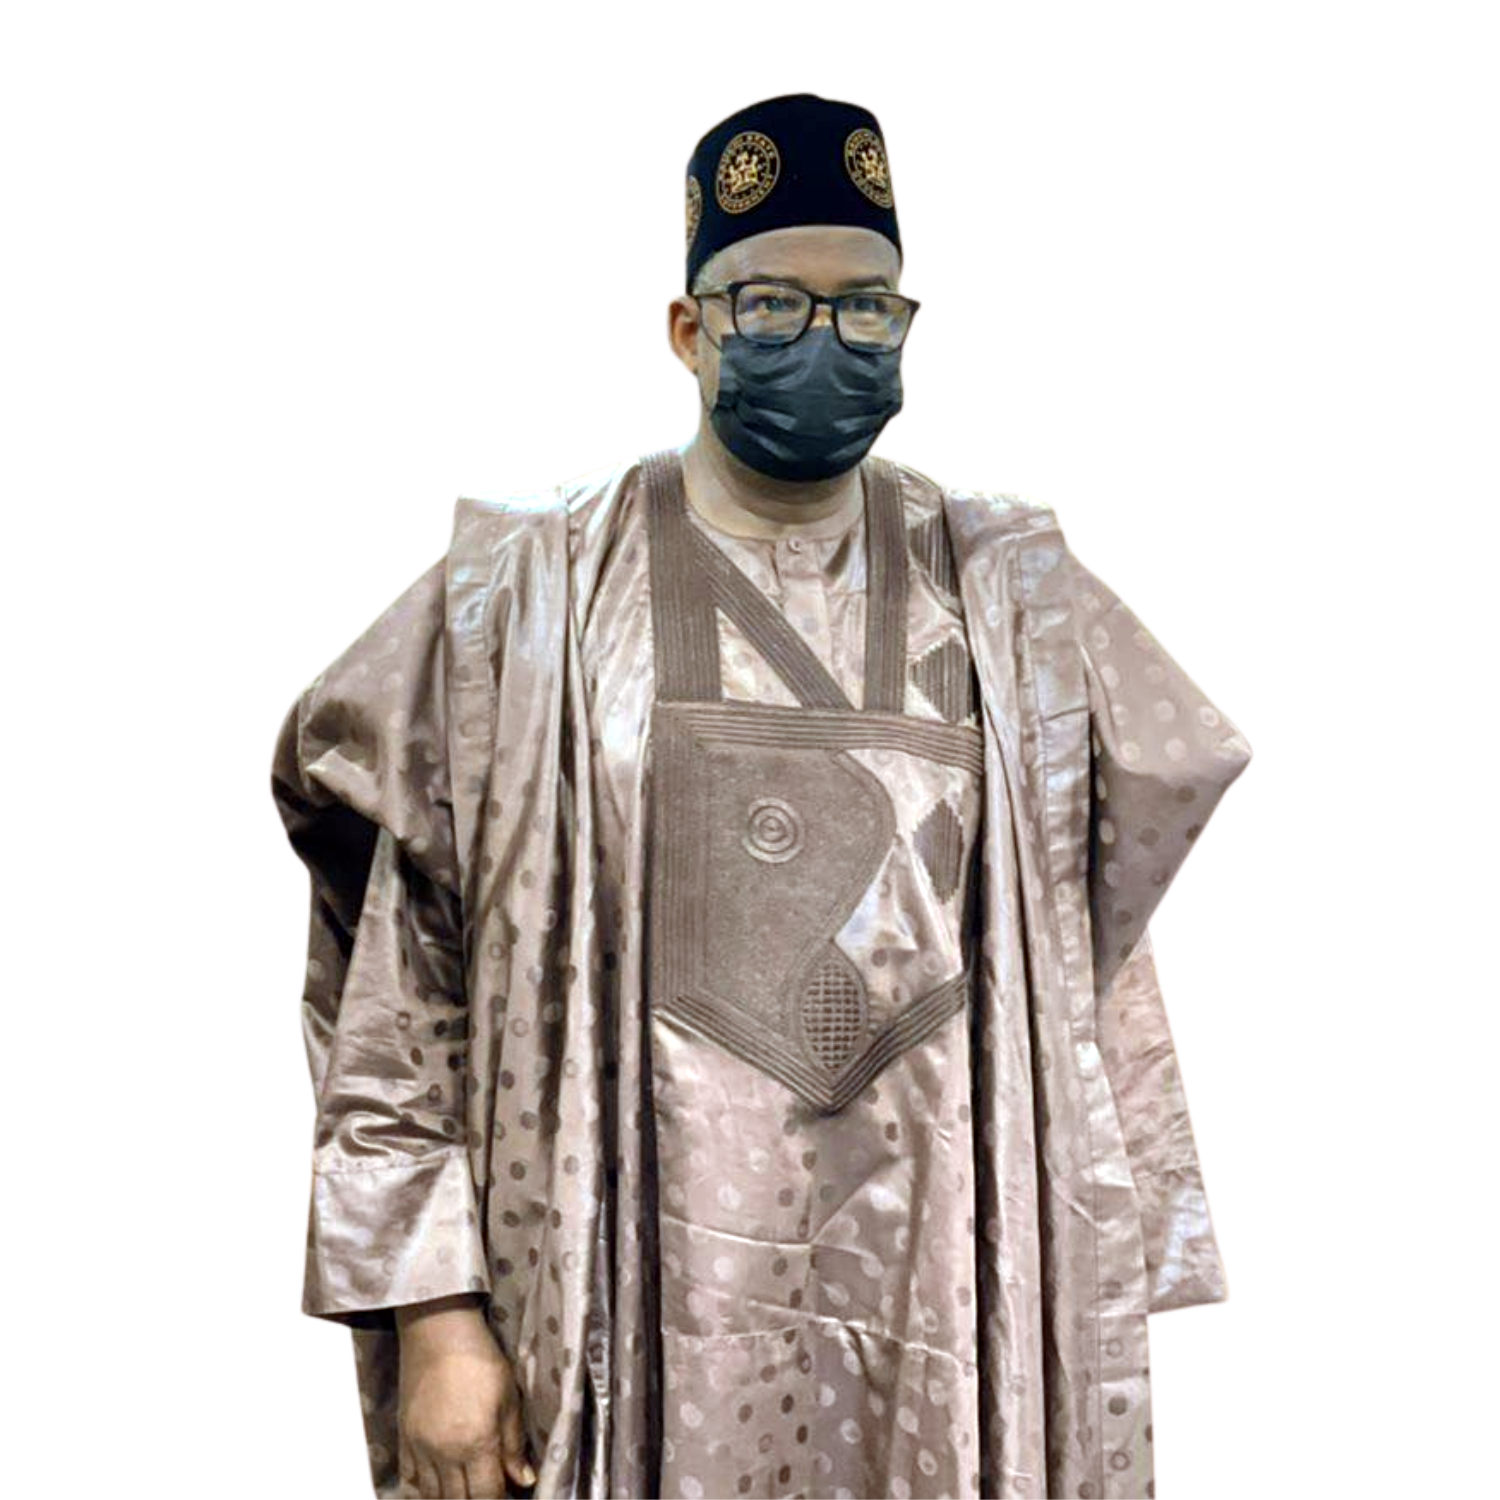 https://www.bauchistate.gov.ng/wp-content/uploads/2022/06/Profile-2.png